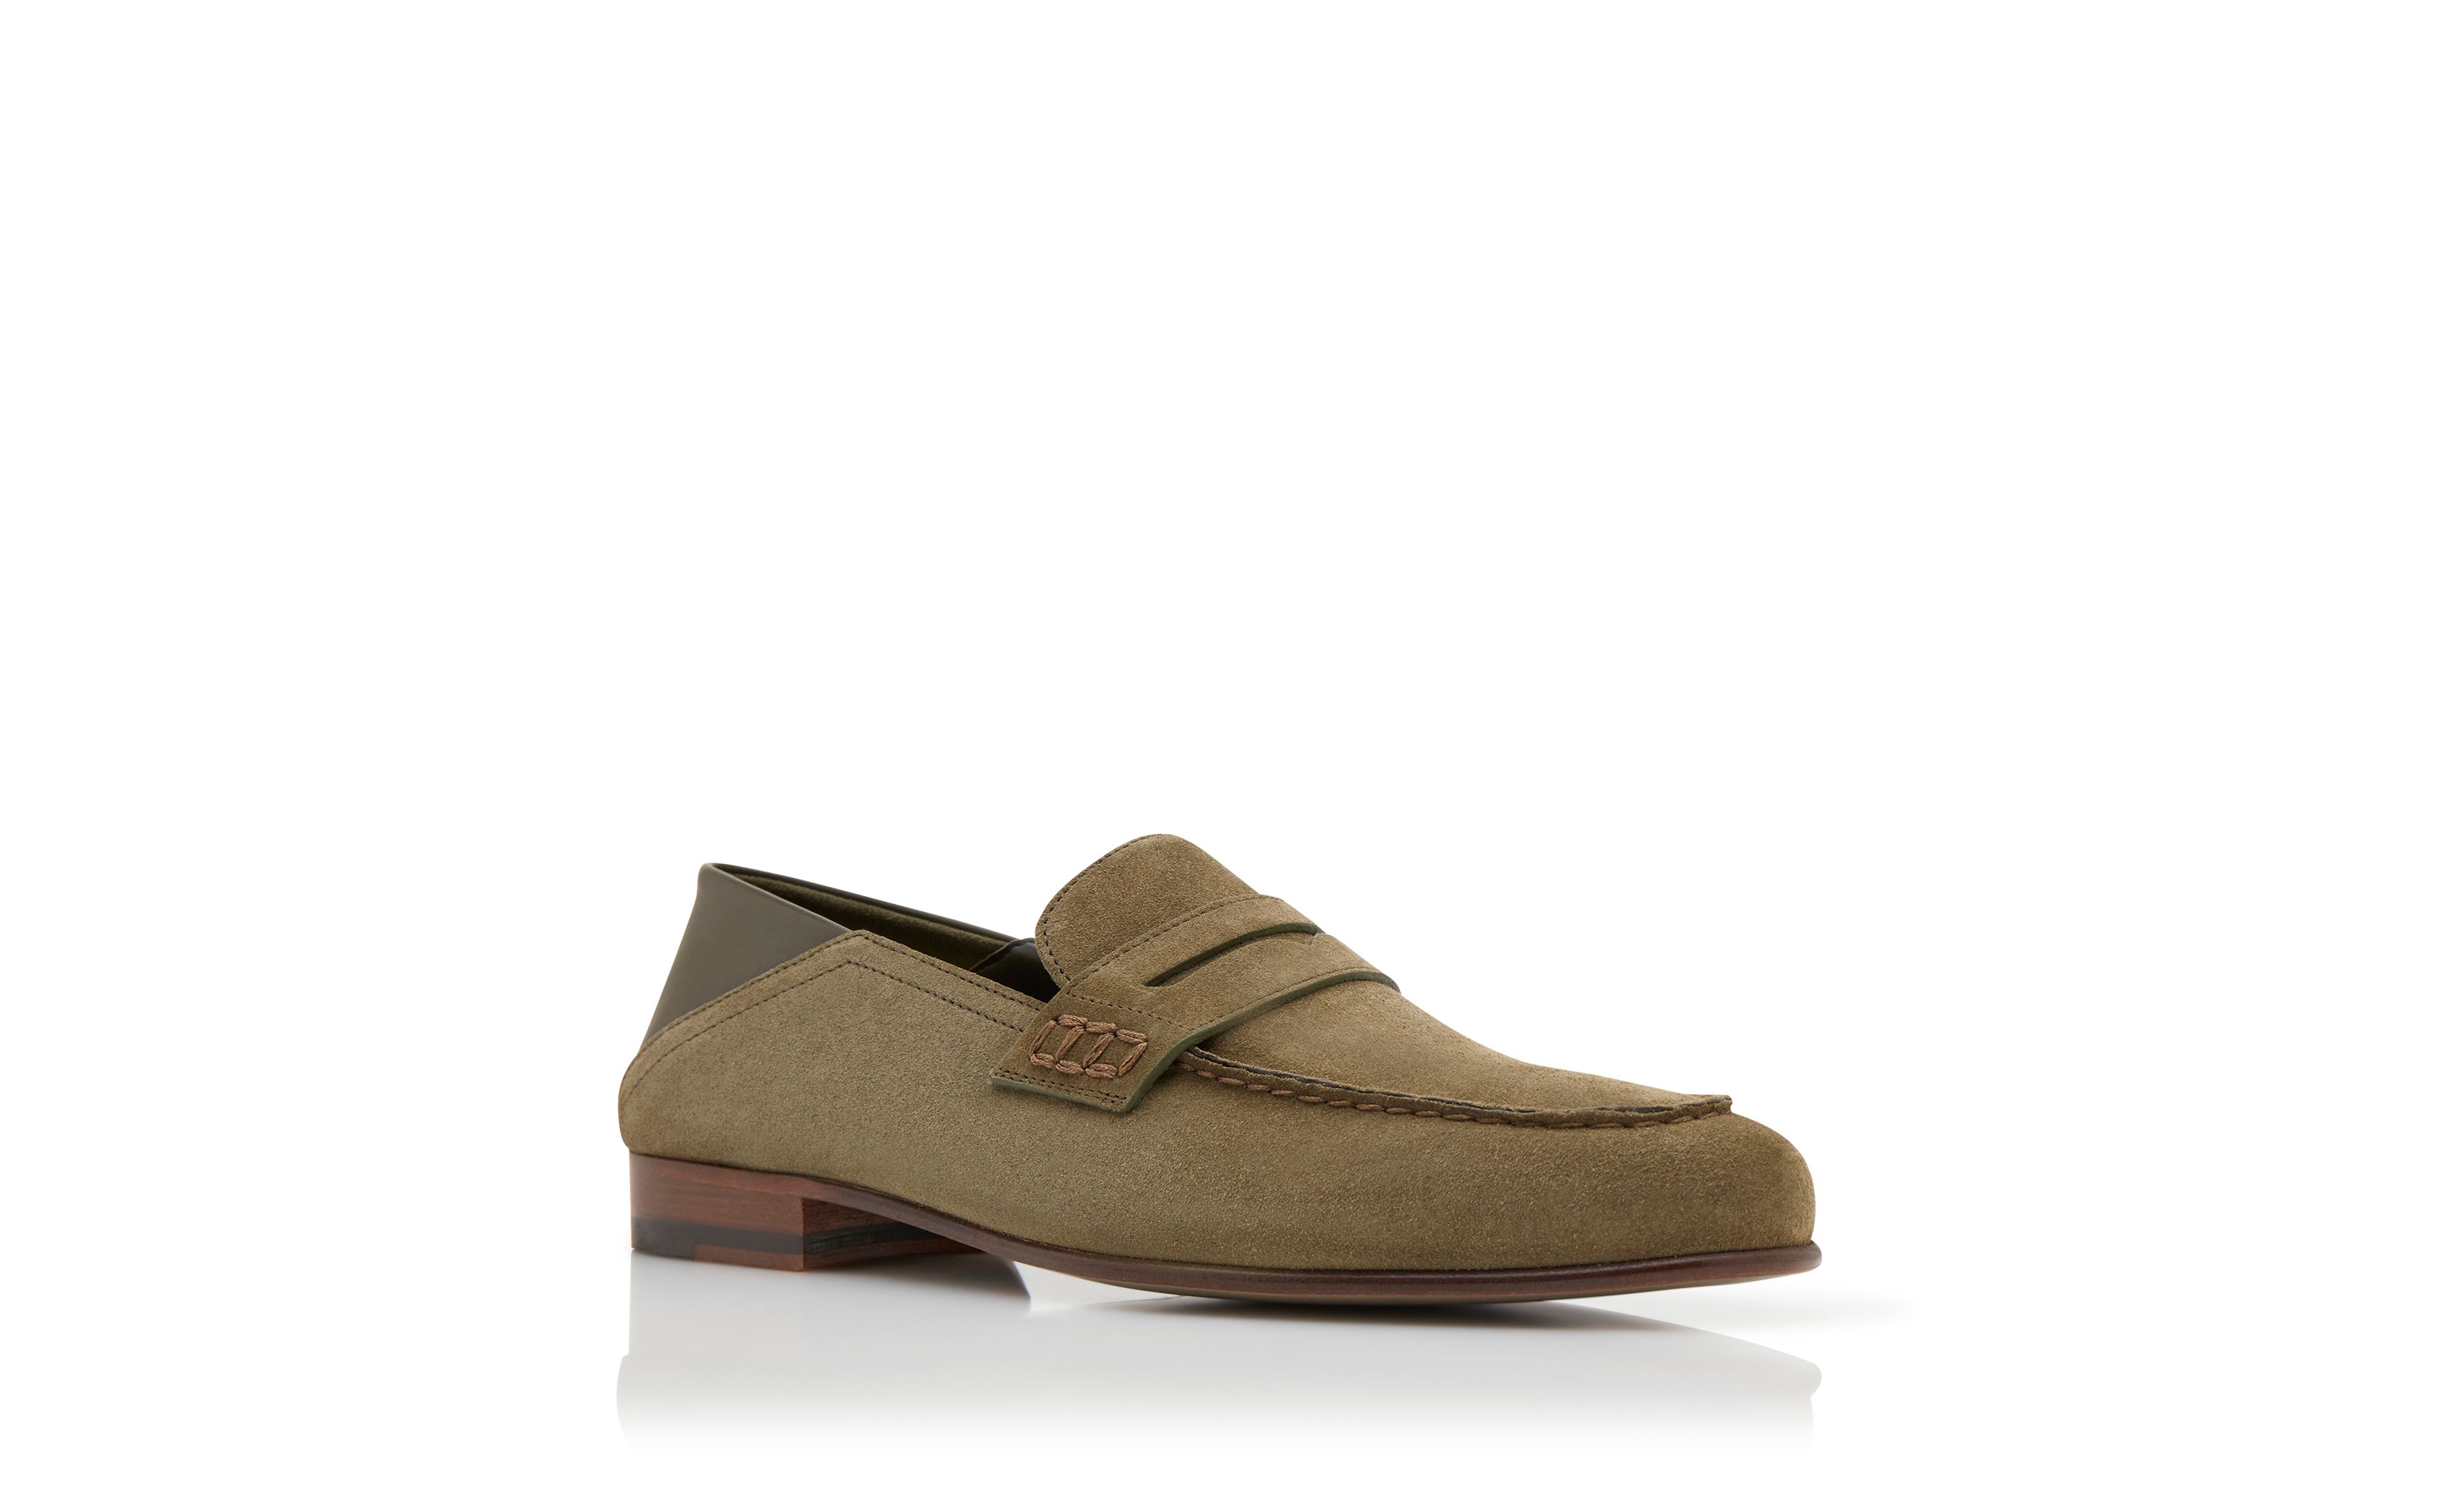 Designer Khaki Suede Penny Loafers - Image Upsell